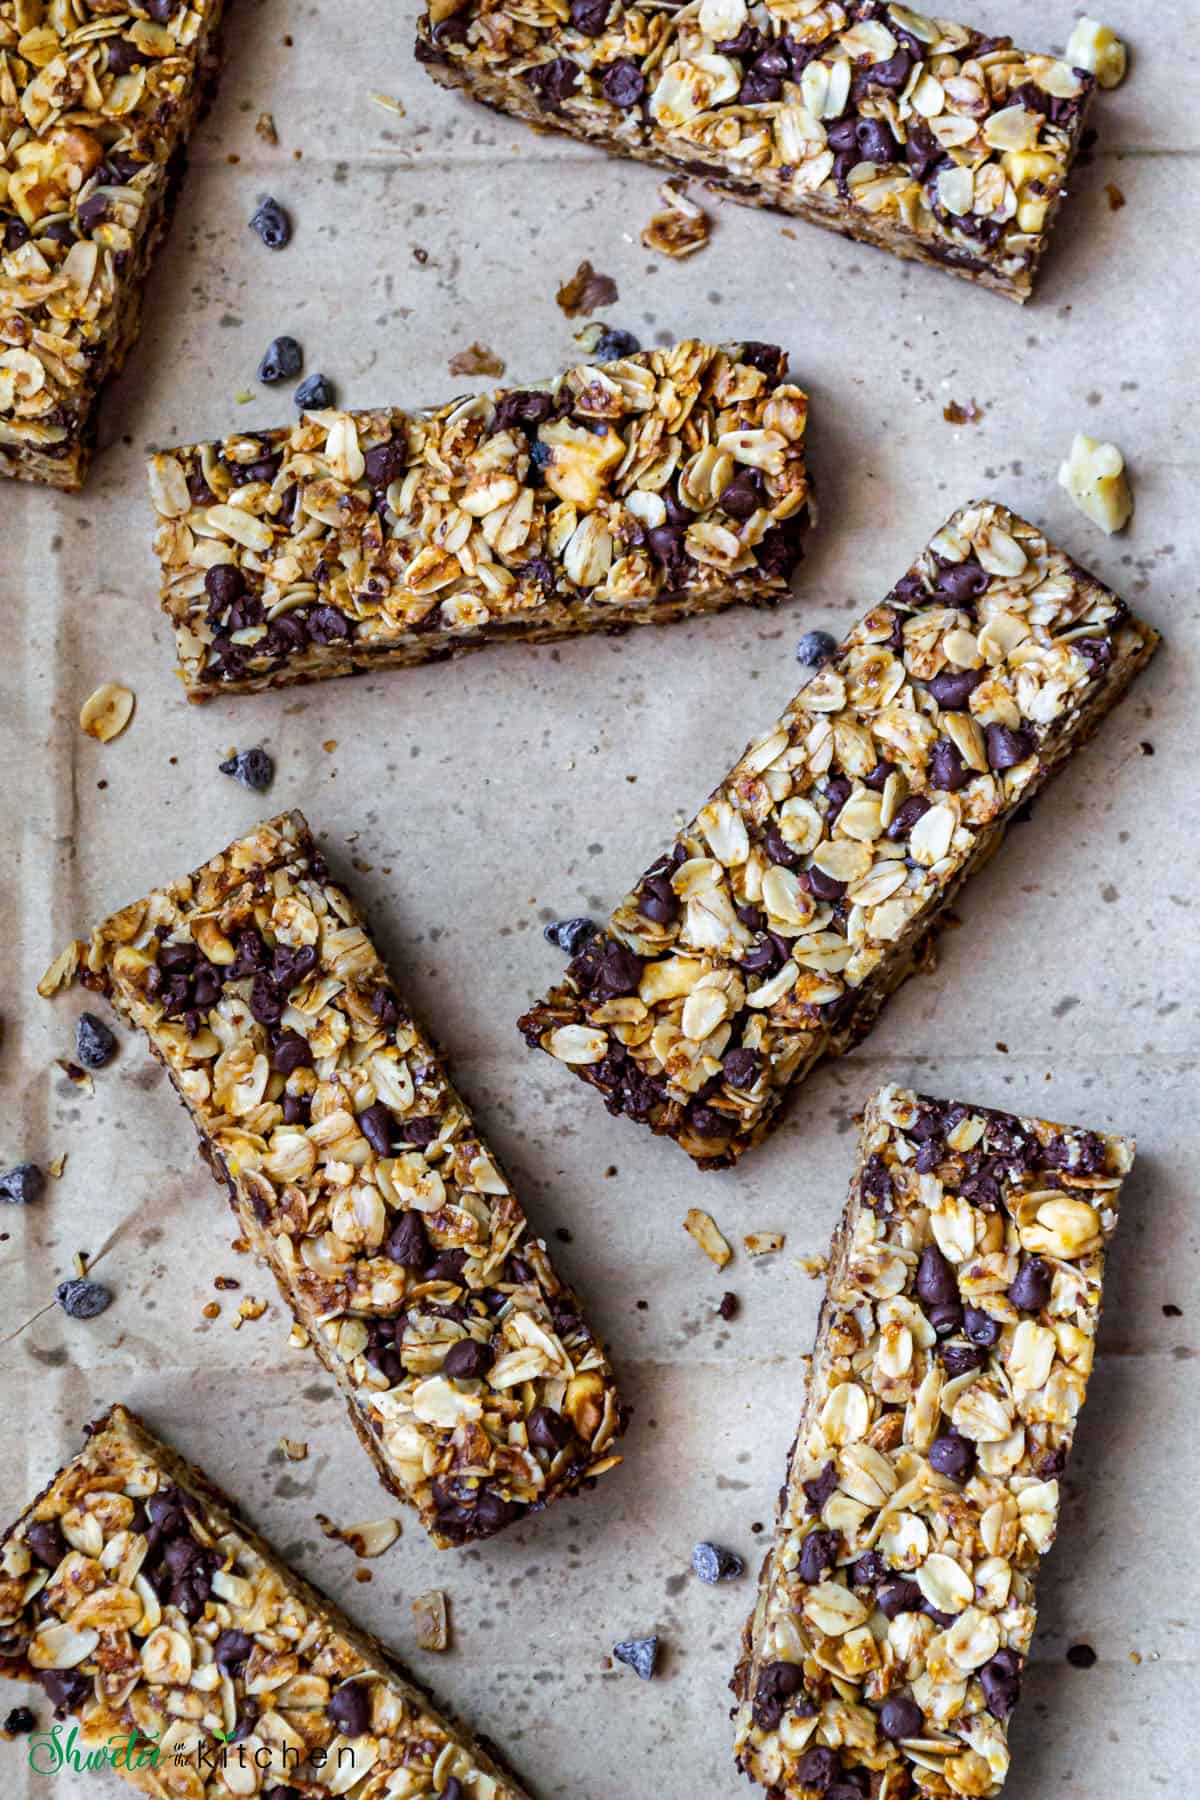 Chewy chocolate chip granola bars scattered on brown paper with bits of chocolate chips and walnuts